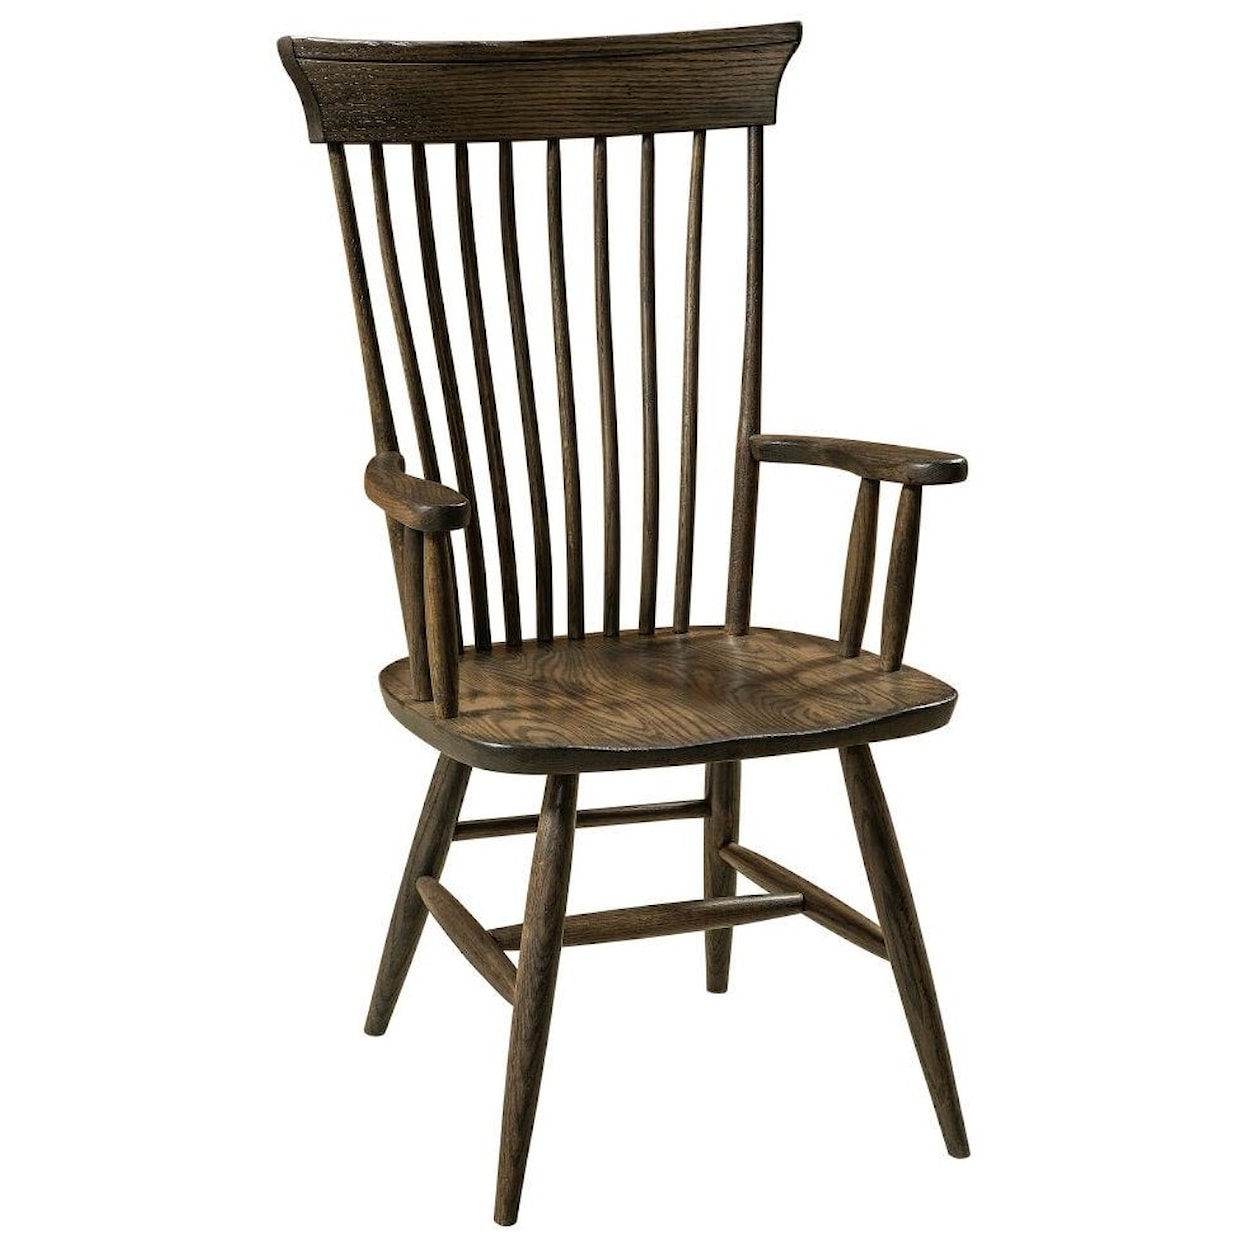 F&N Woodworking Concord Arm Chair